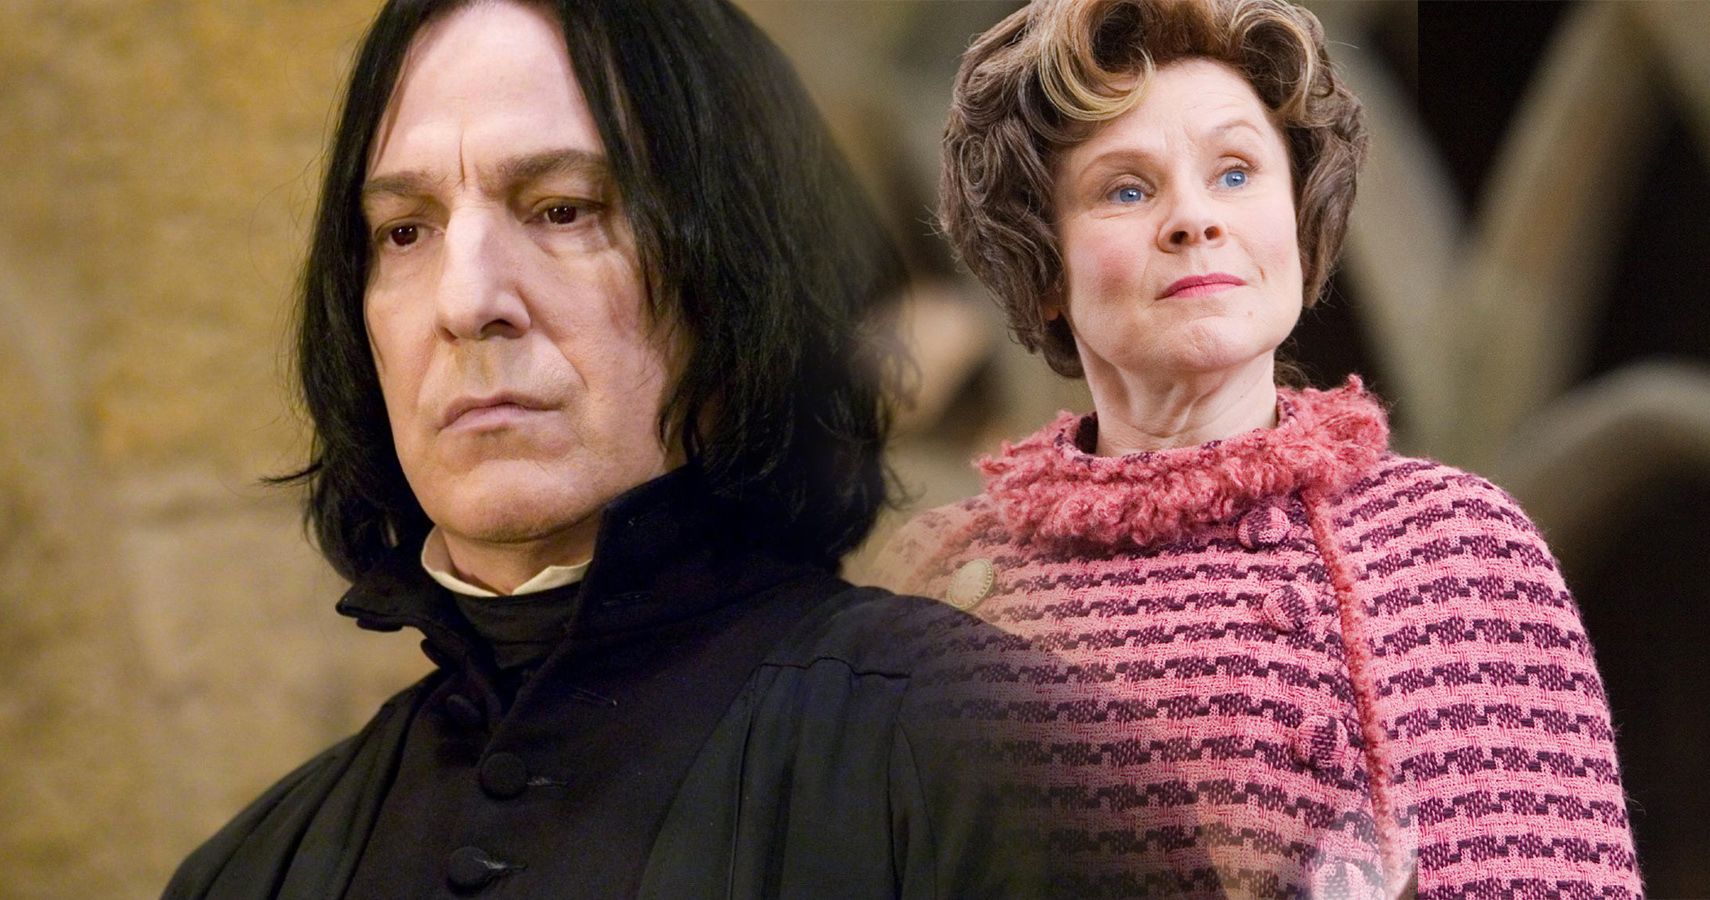 The Most Hated Professors In The History Of Hogwarts Ranked